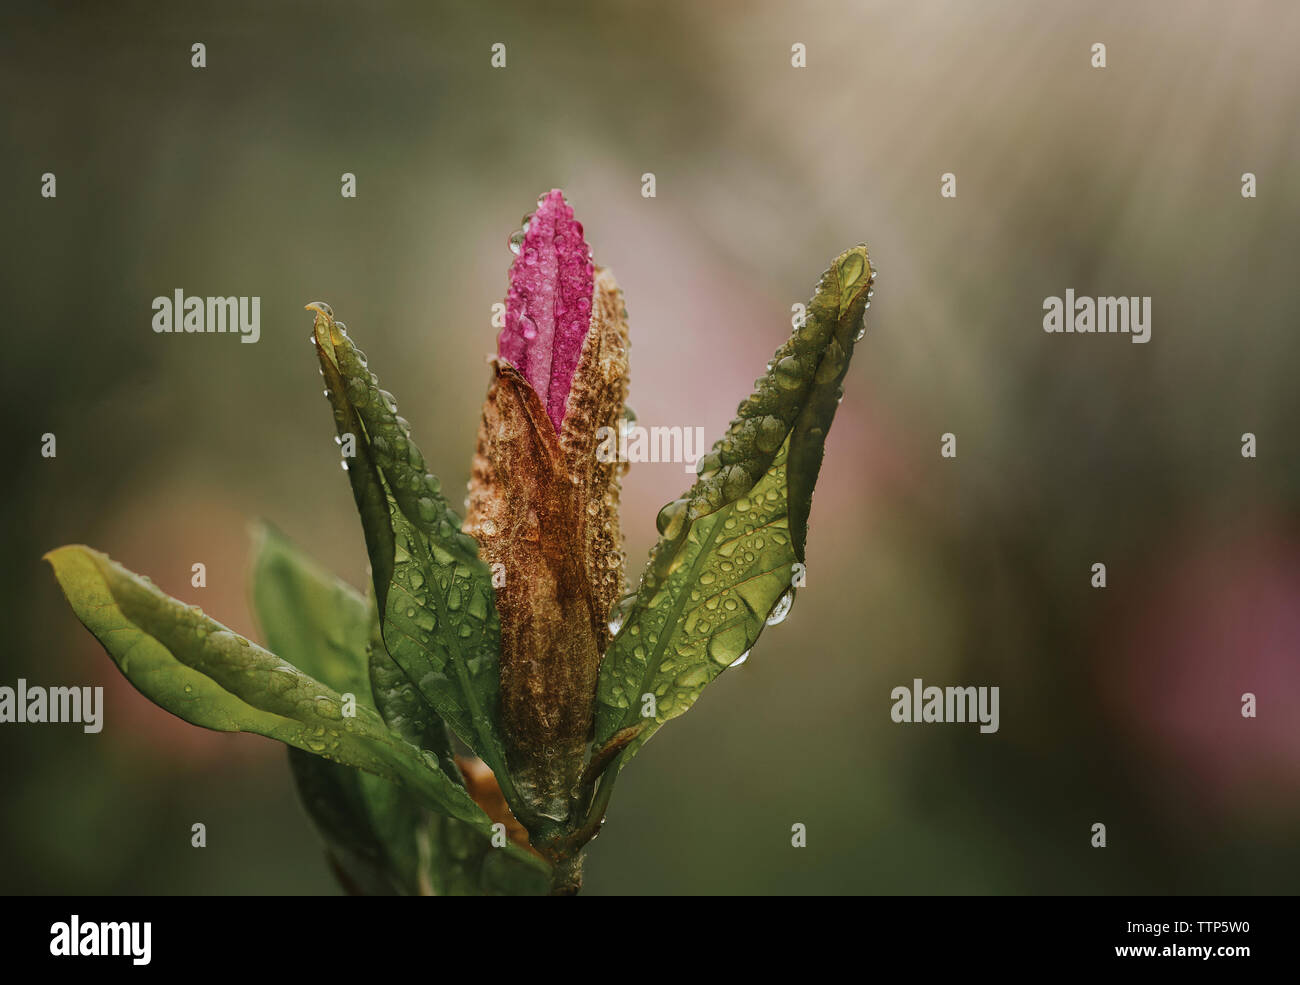 Close-up of wet leaves growing on plant during rainy season Stock Photo